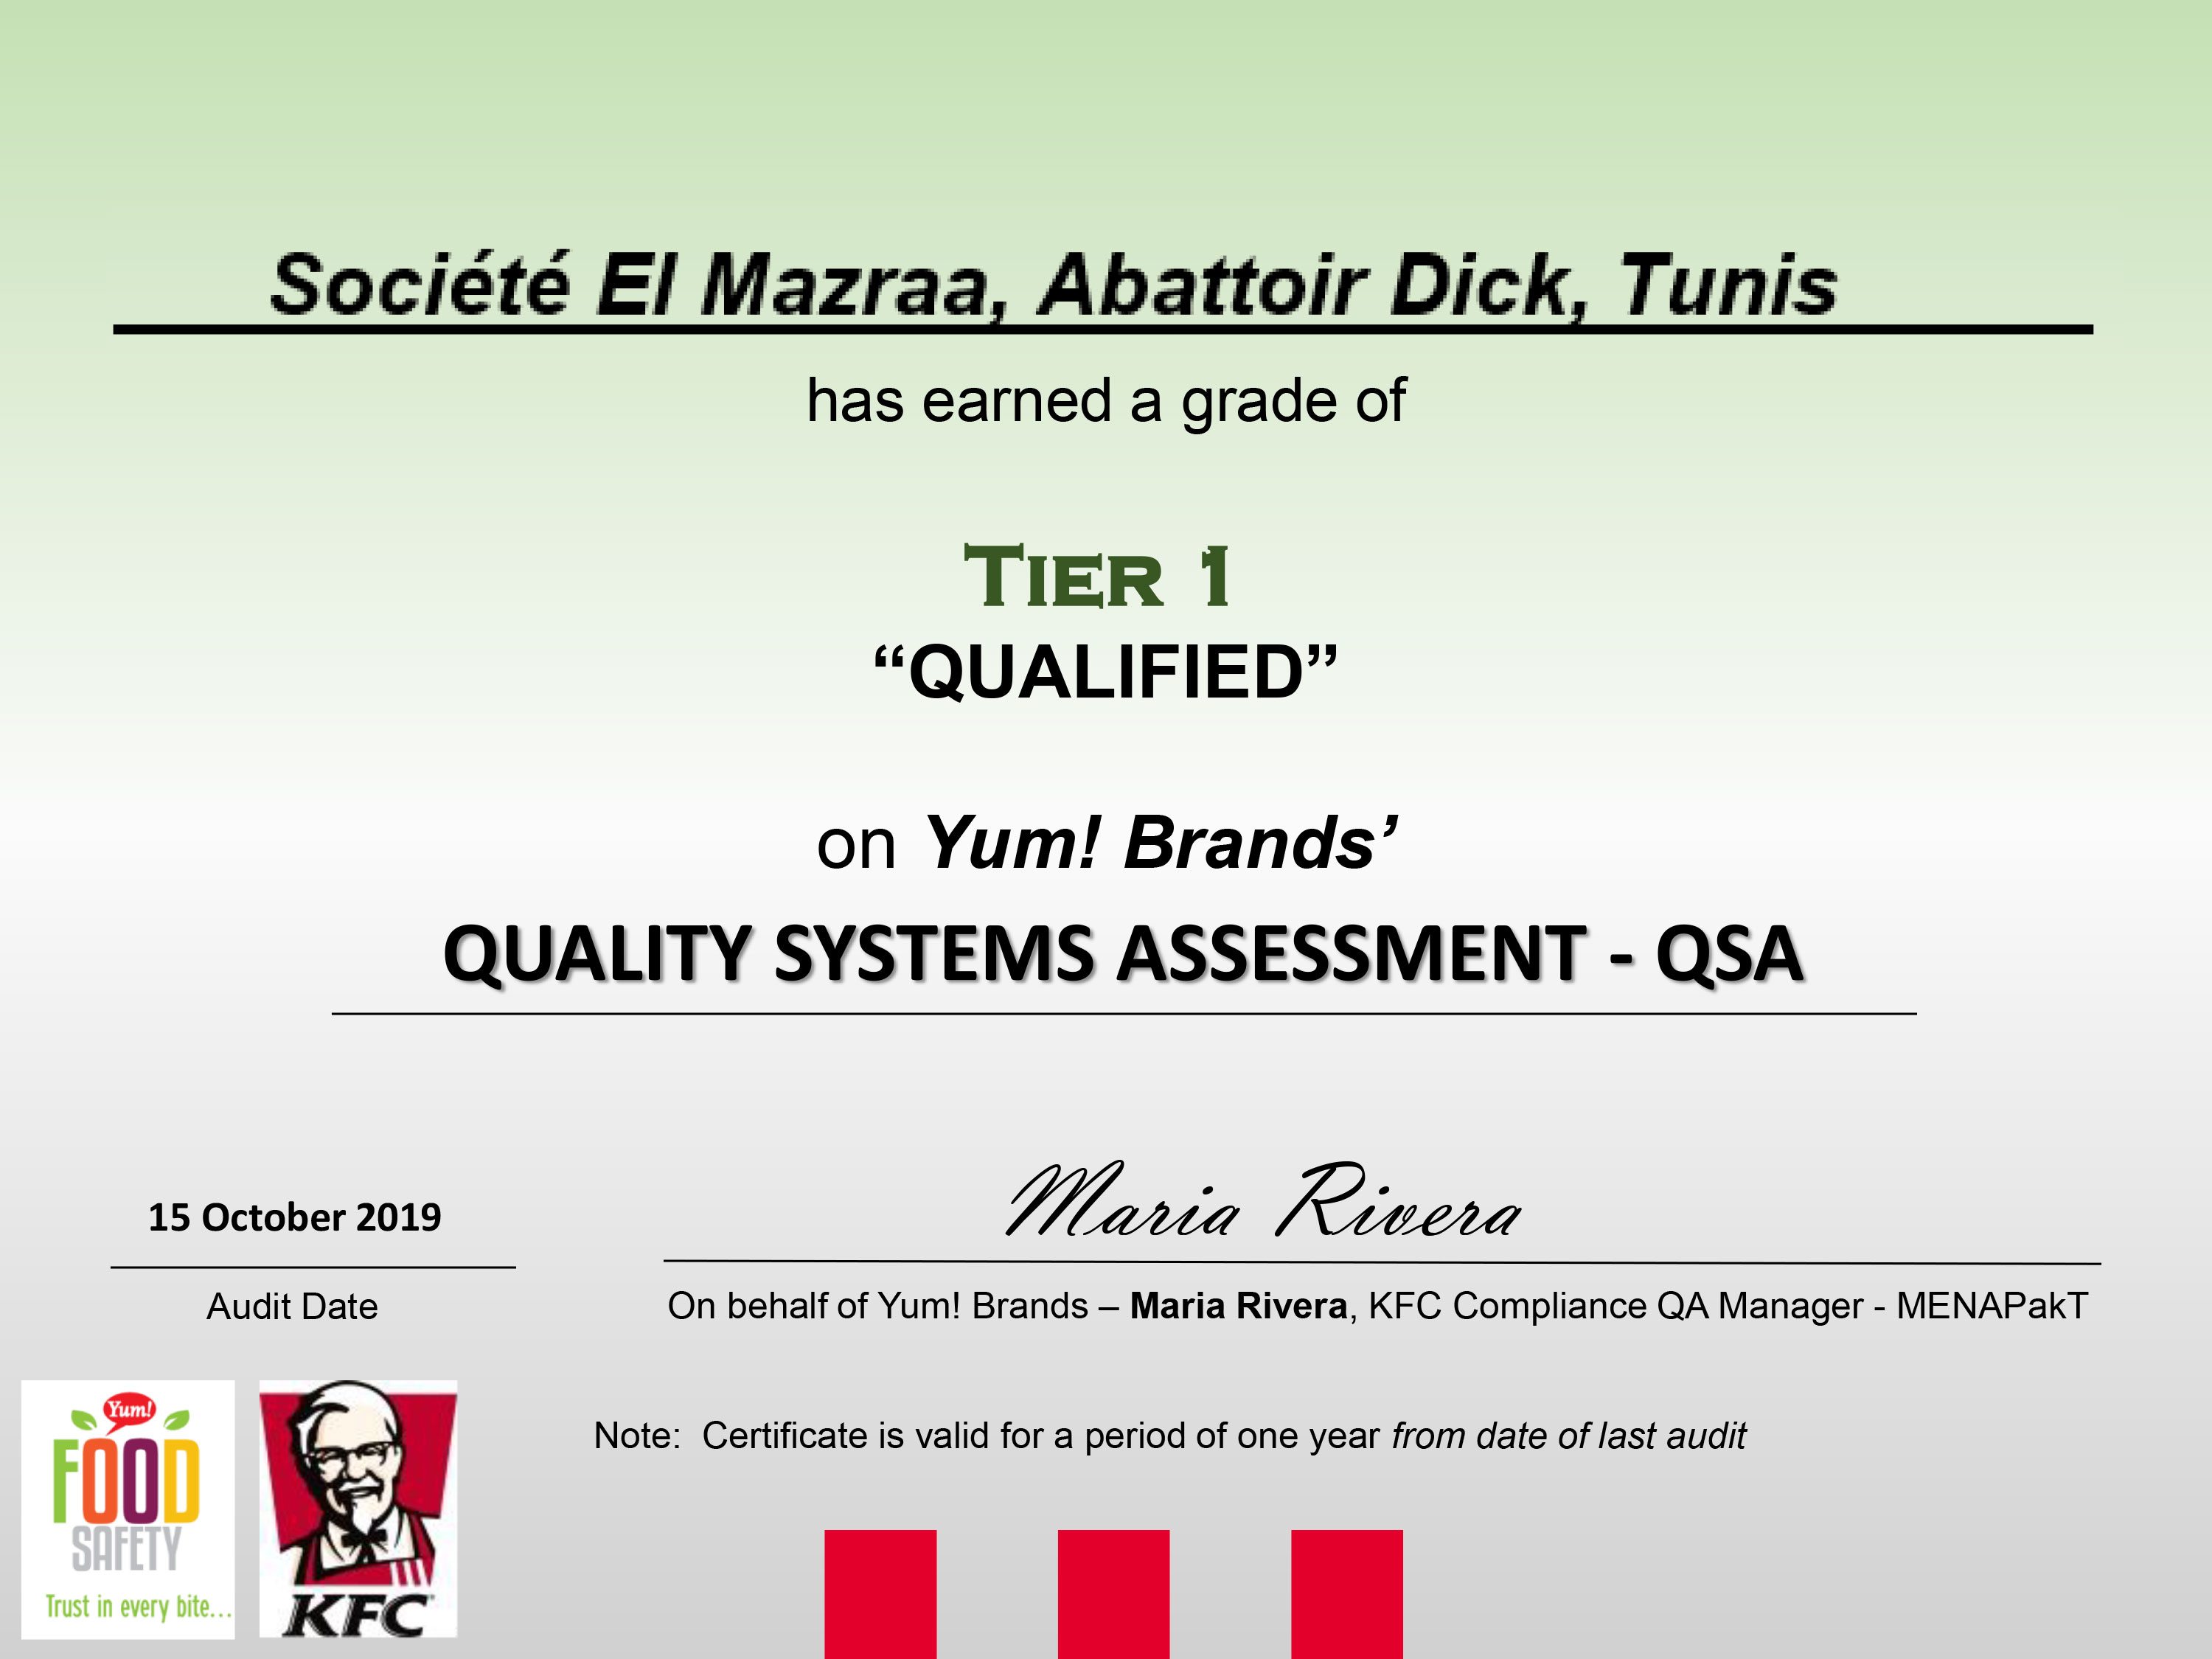 Grade of Tier 1 « Qualified » on Yum! Brands’